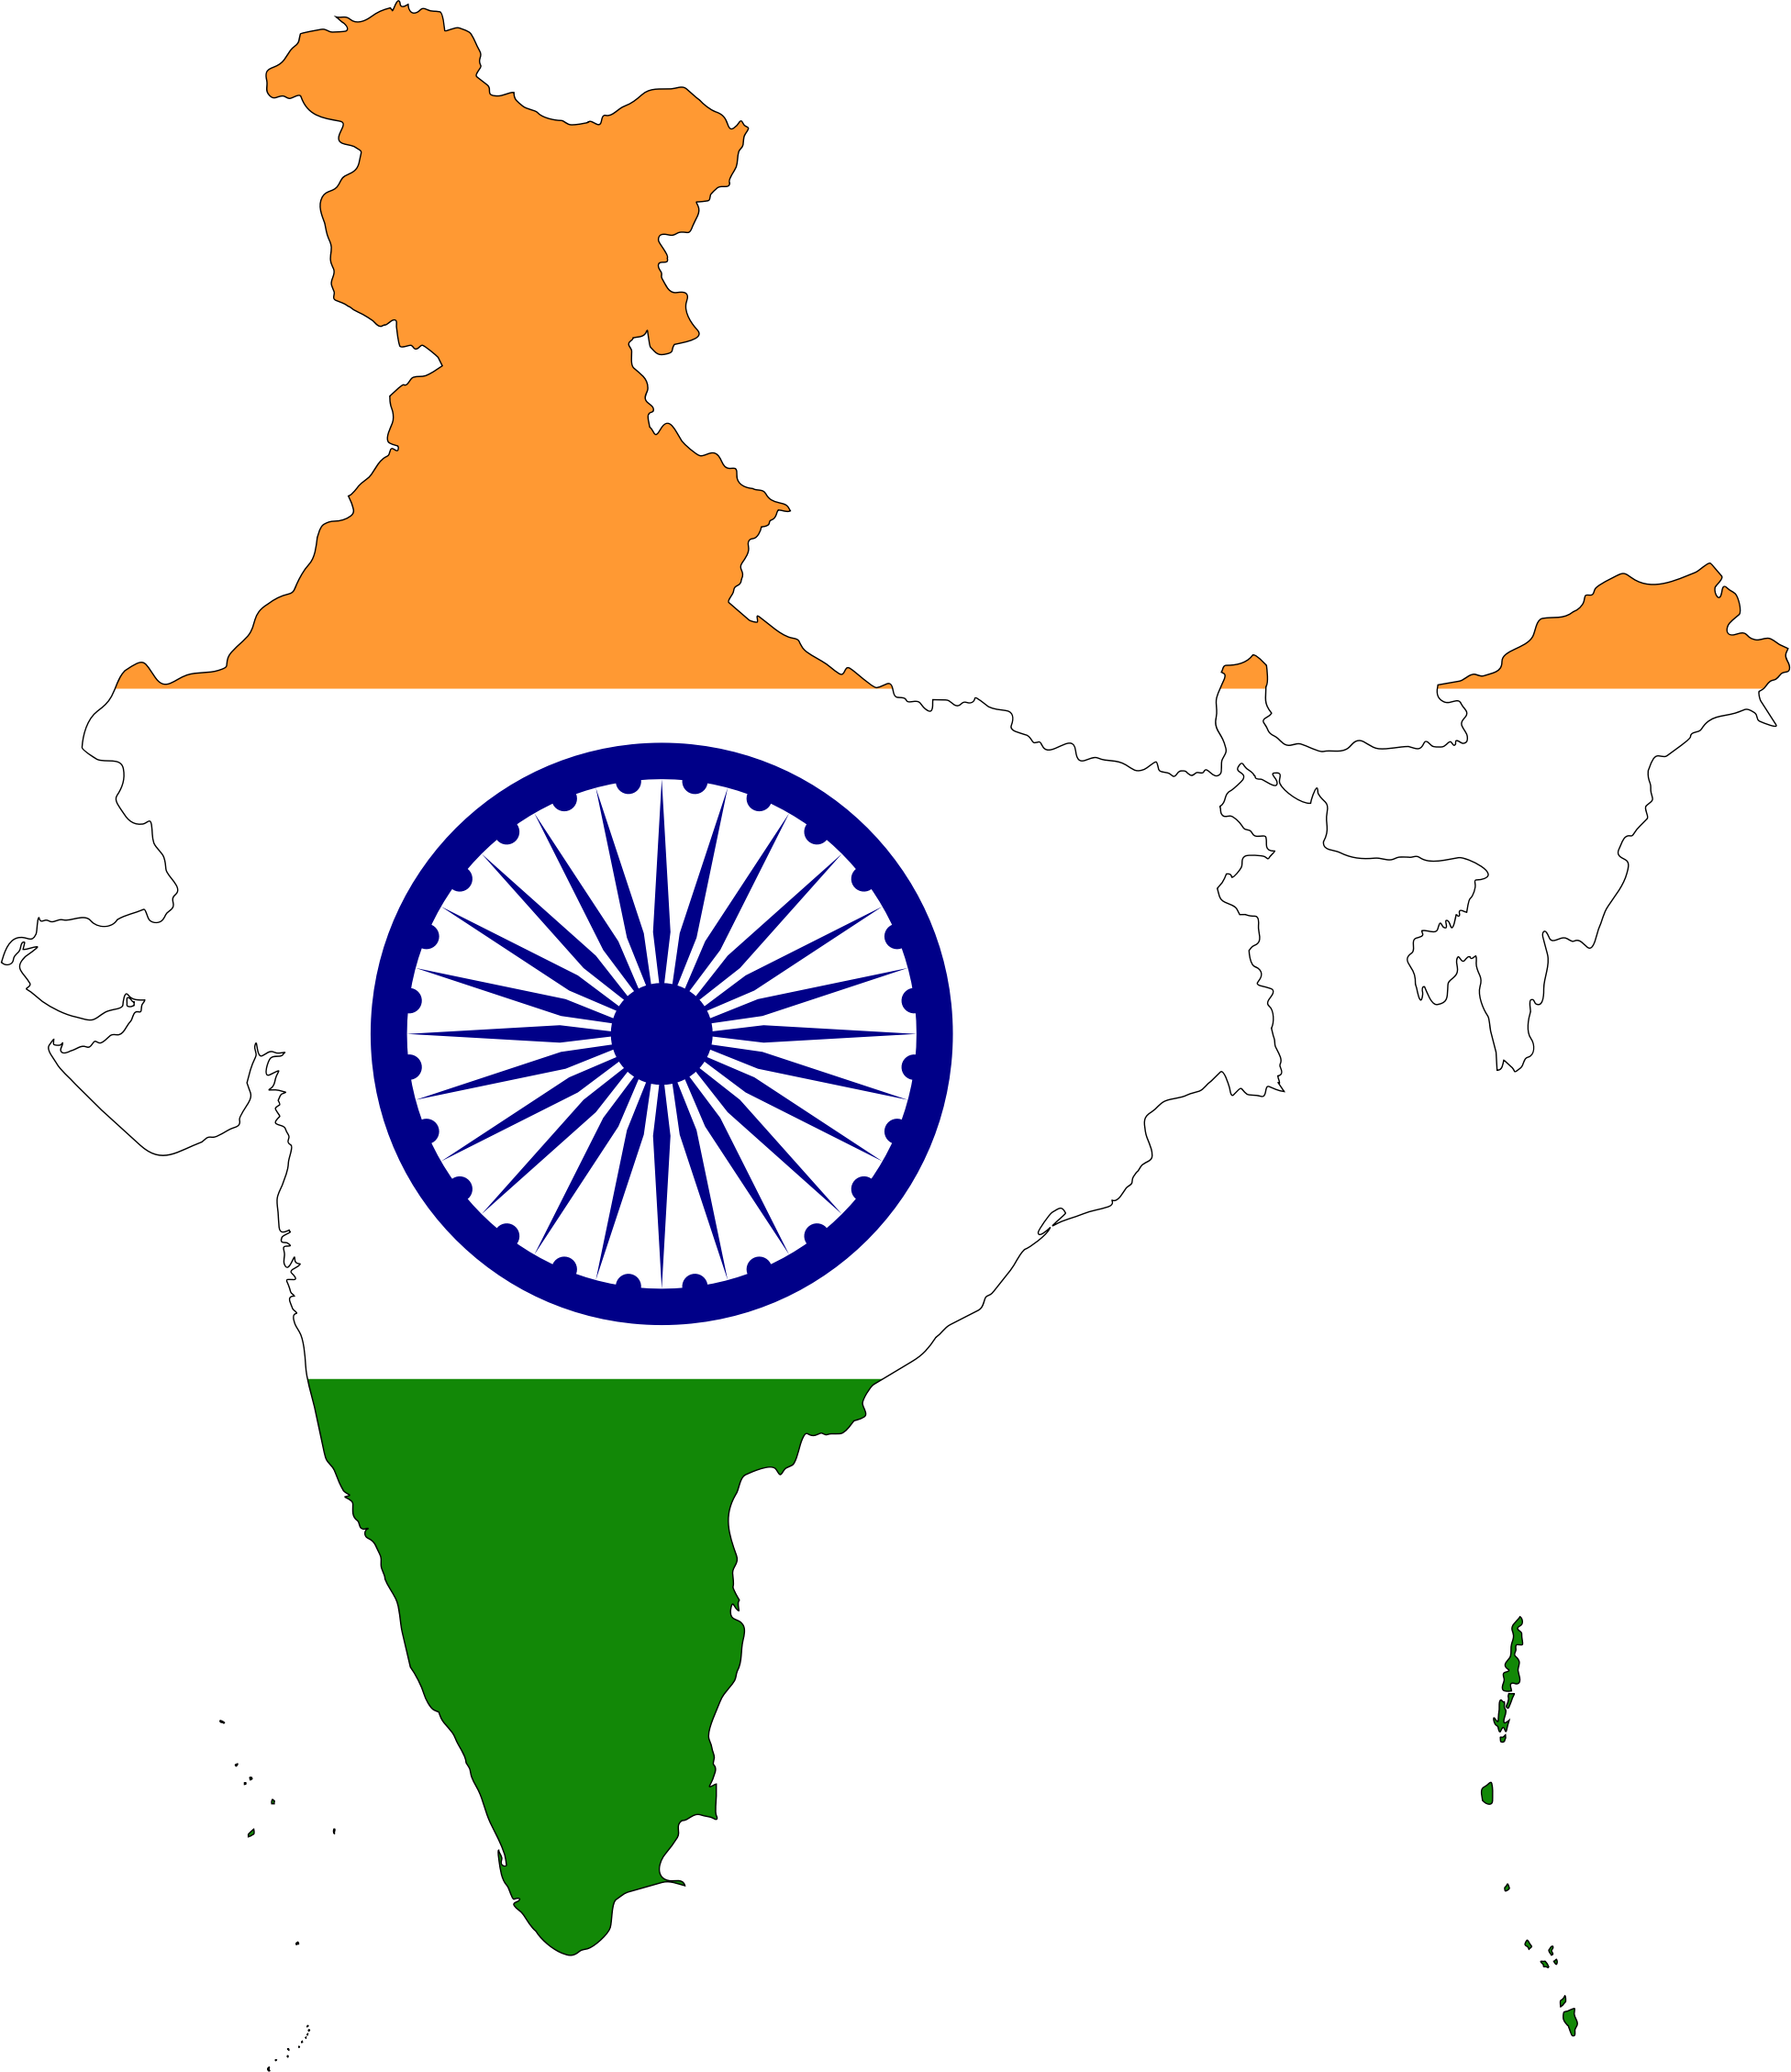 Medium Image - India Country With Flag (1106x1280)